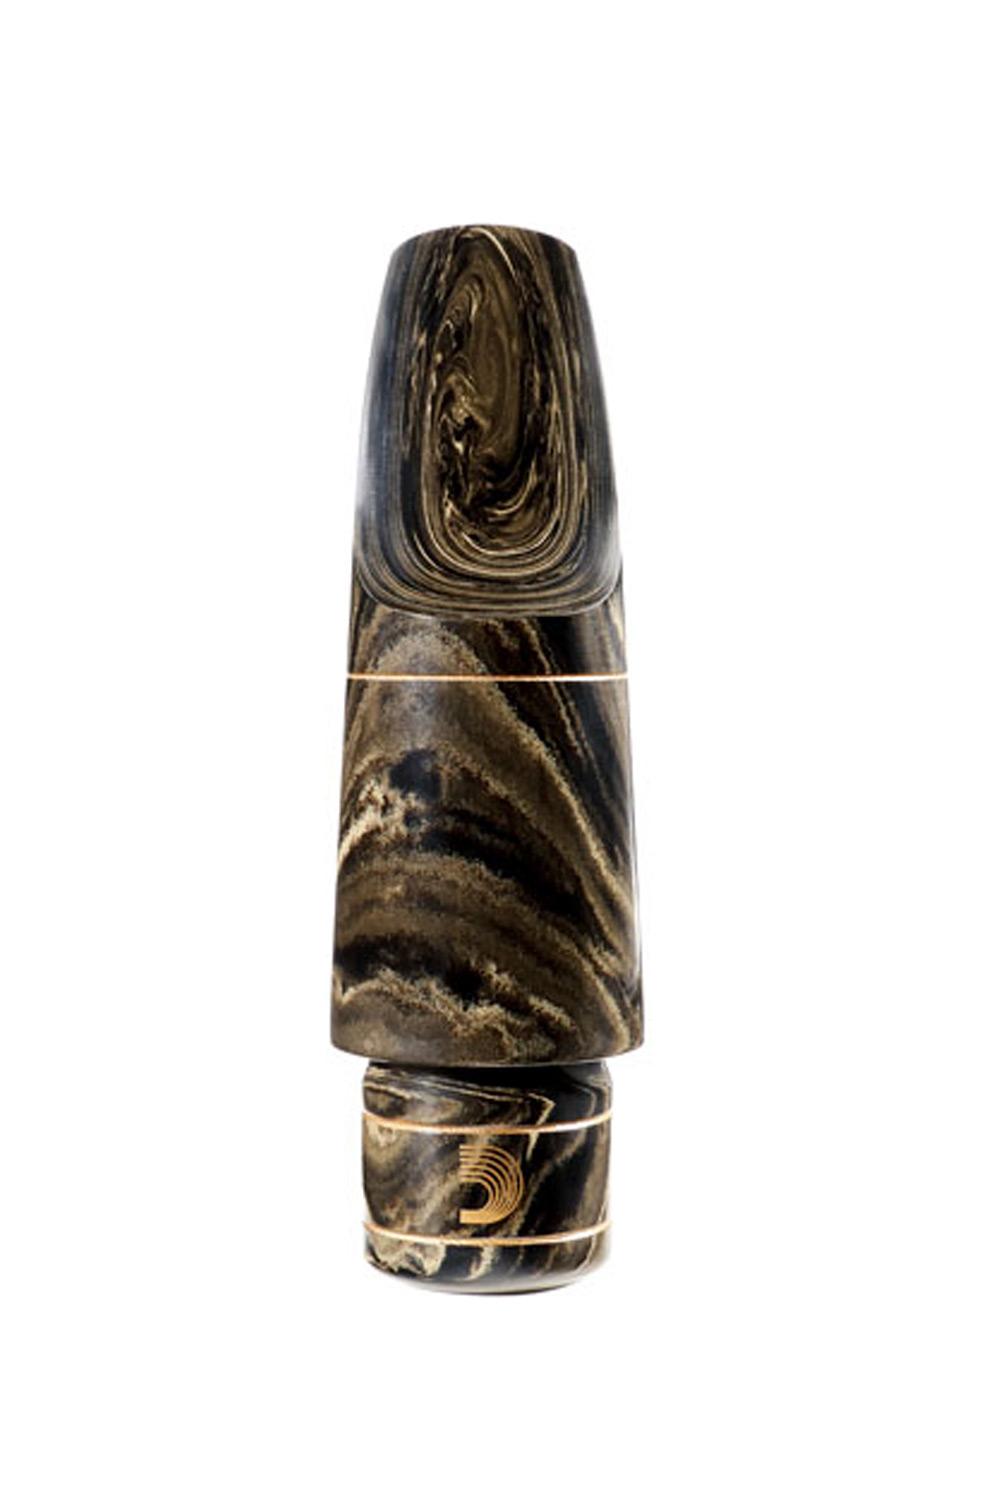 D'addario Jazz Select Limited Edition Marbled Tenor Sax Mouthpiece